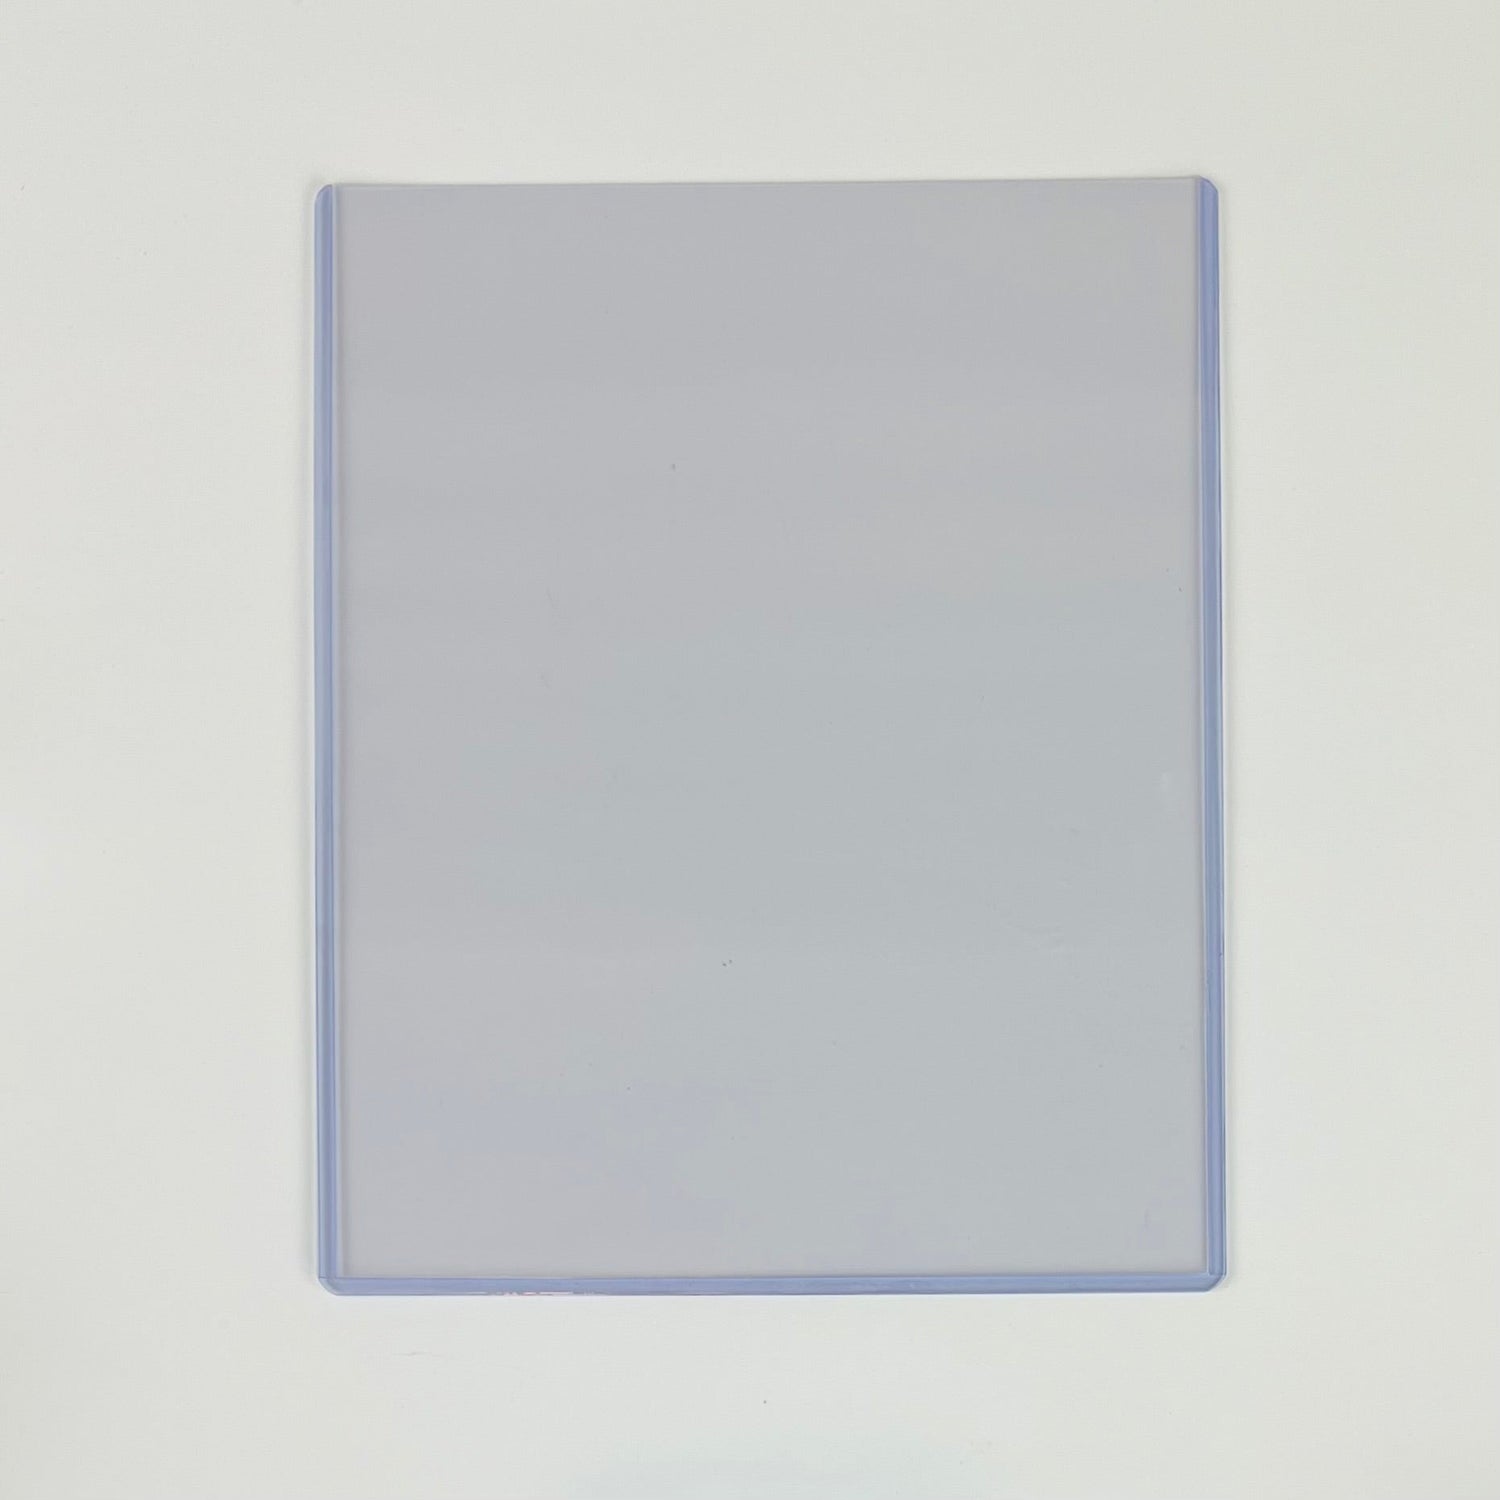 8"x10" Toploader 35PT for PhotographsSecurely store and protect your 8"x10" pictures with our crystal clear PVC toploaders with Blue Hint for enhanced UV protection.$8.99